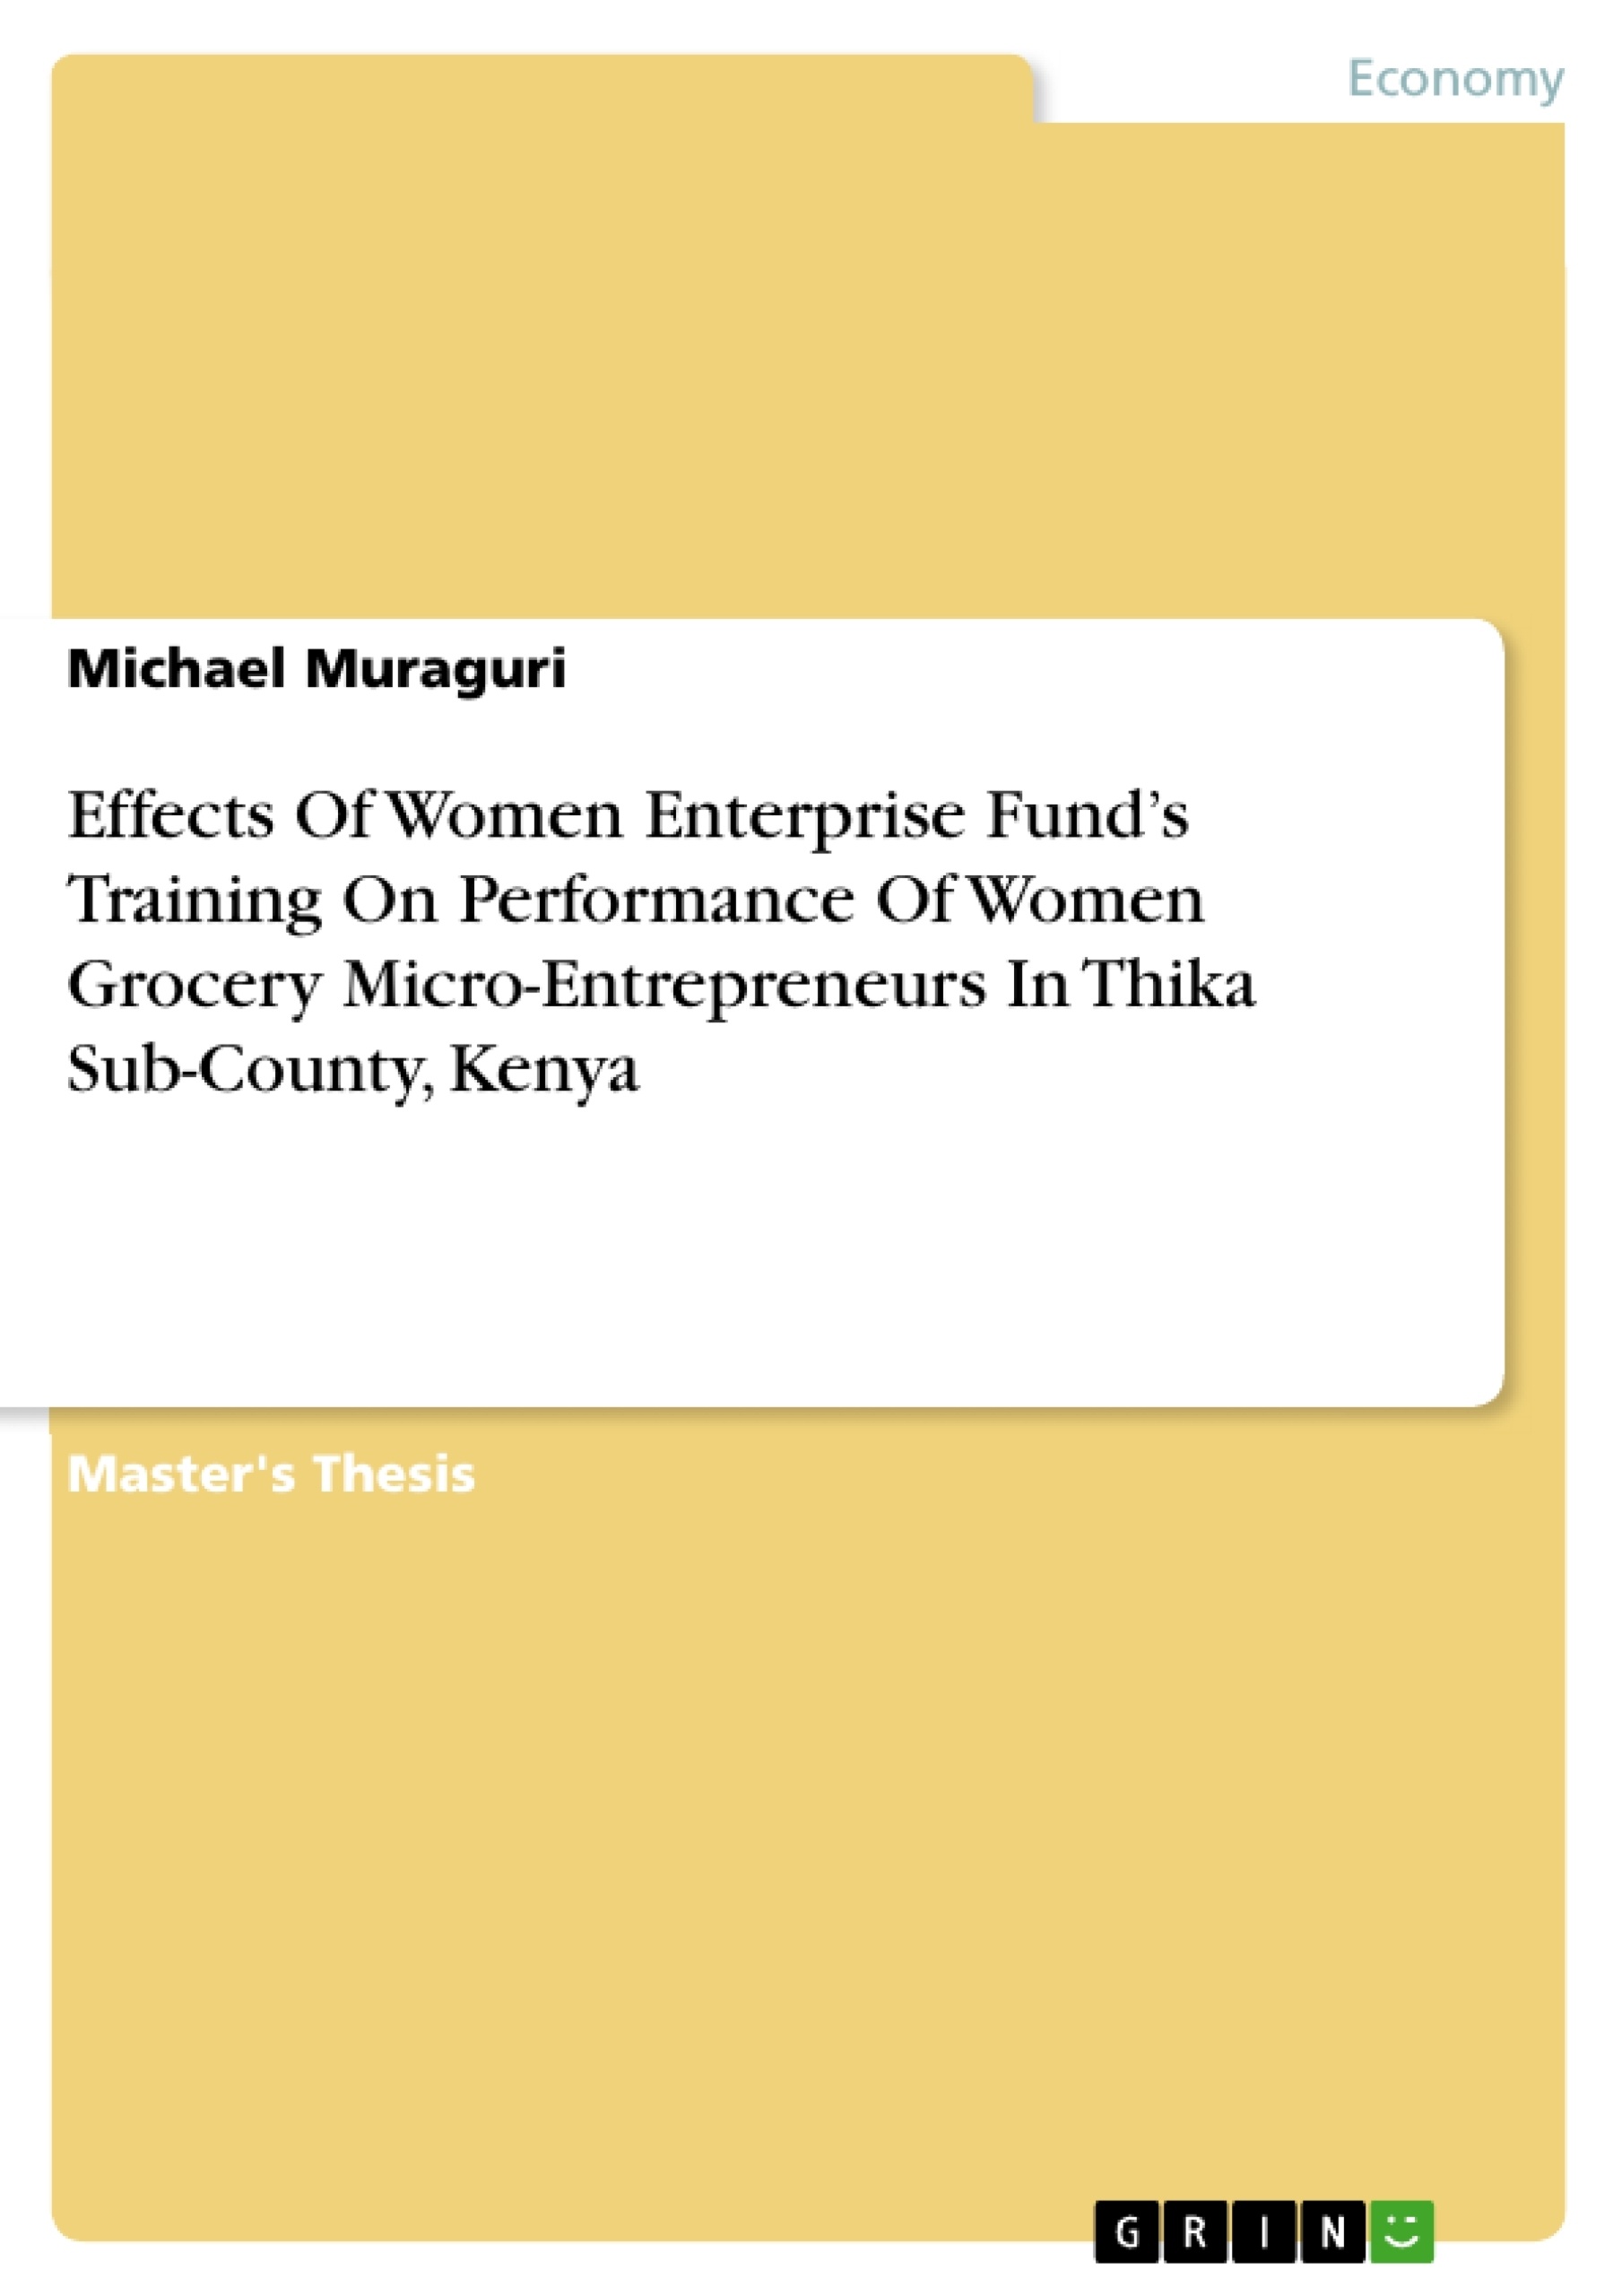 Título: Effects Of Women Enterprise Fund’s Training On Performance Of Women Grocery Micro-Entrepreneurs In Thika Sub-County, Kenya